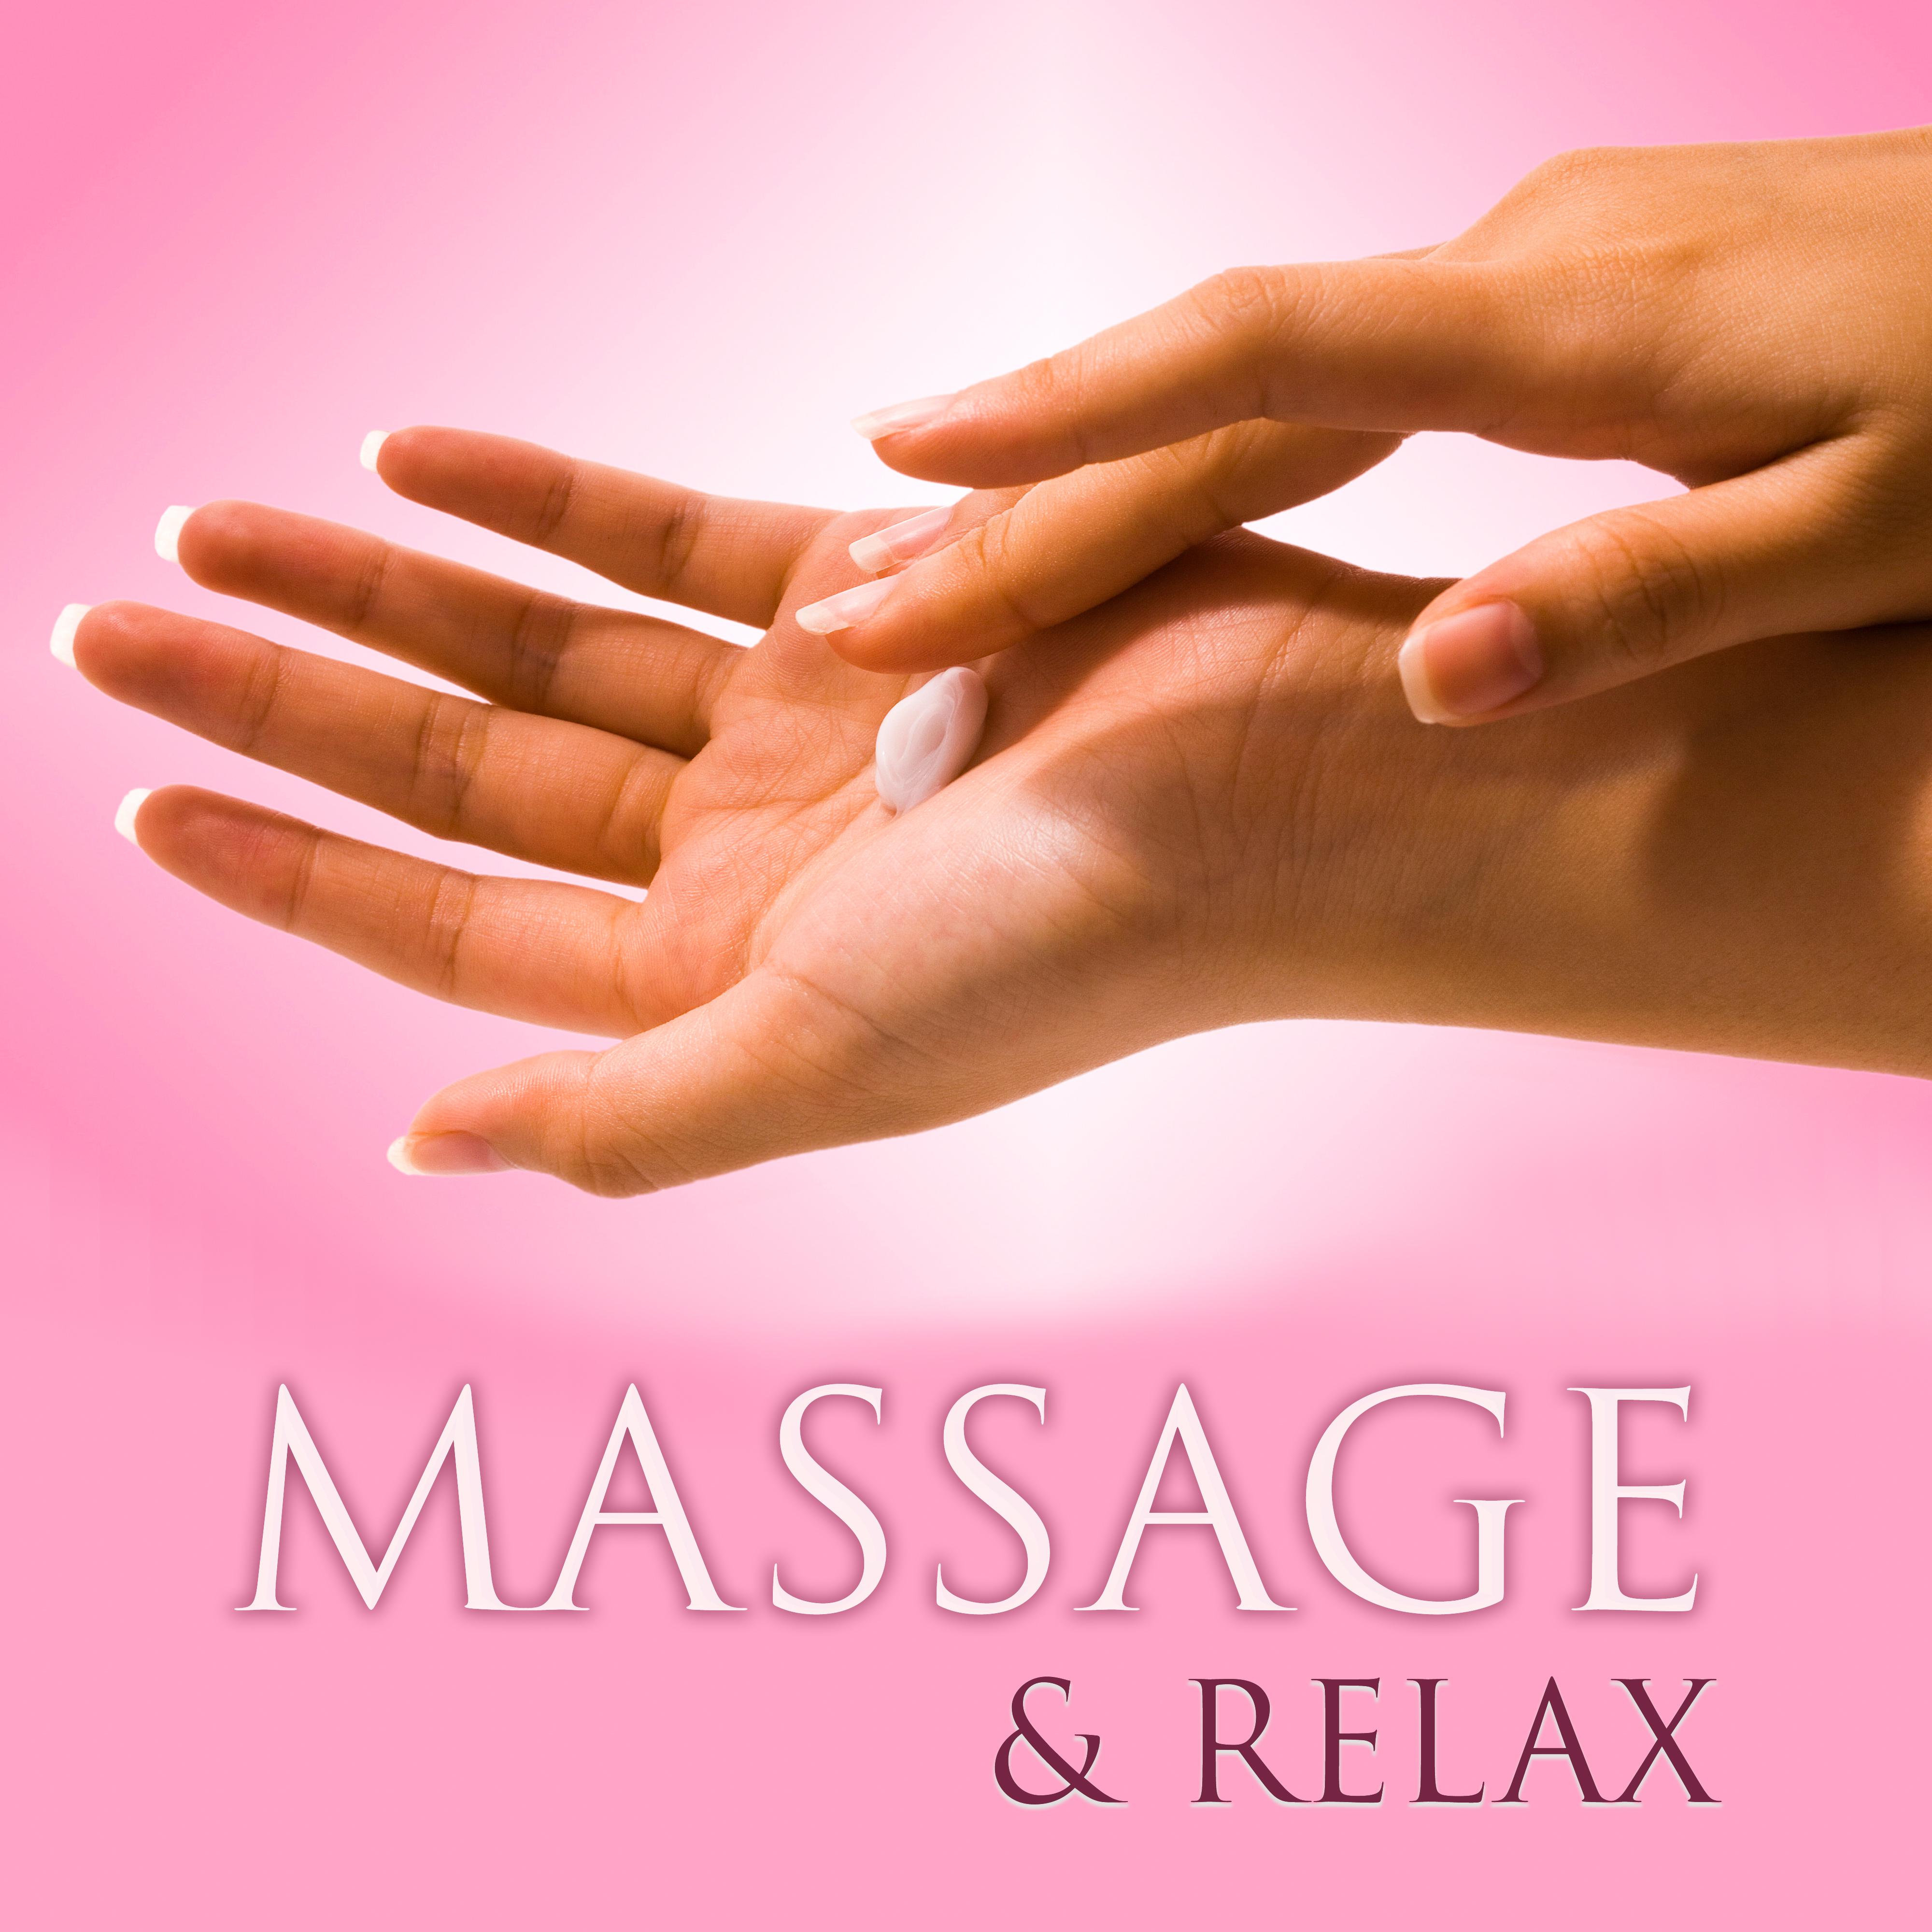 Massage  Relax  Delicate Sounds for Spa, Stress Relief, Reiki Music, Deep Sleep, Meditation, Zen Music to Calm Down